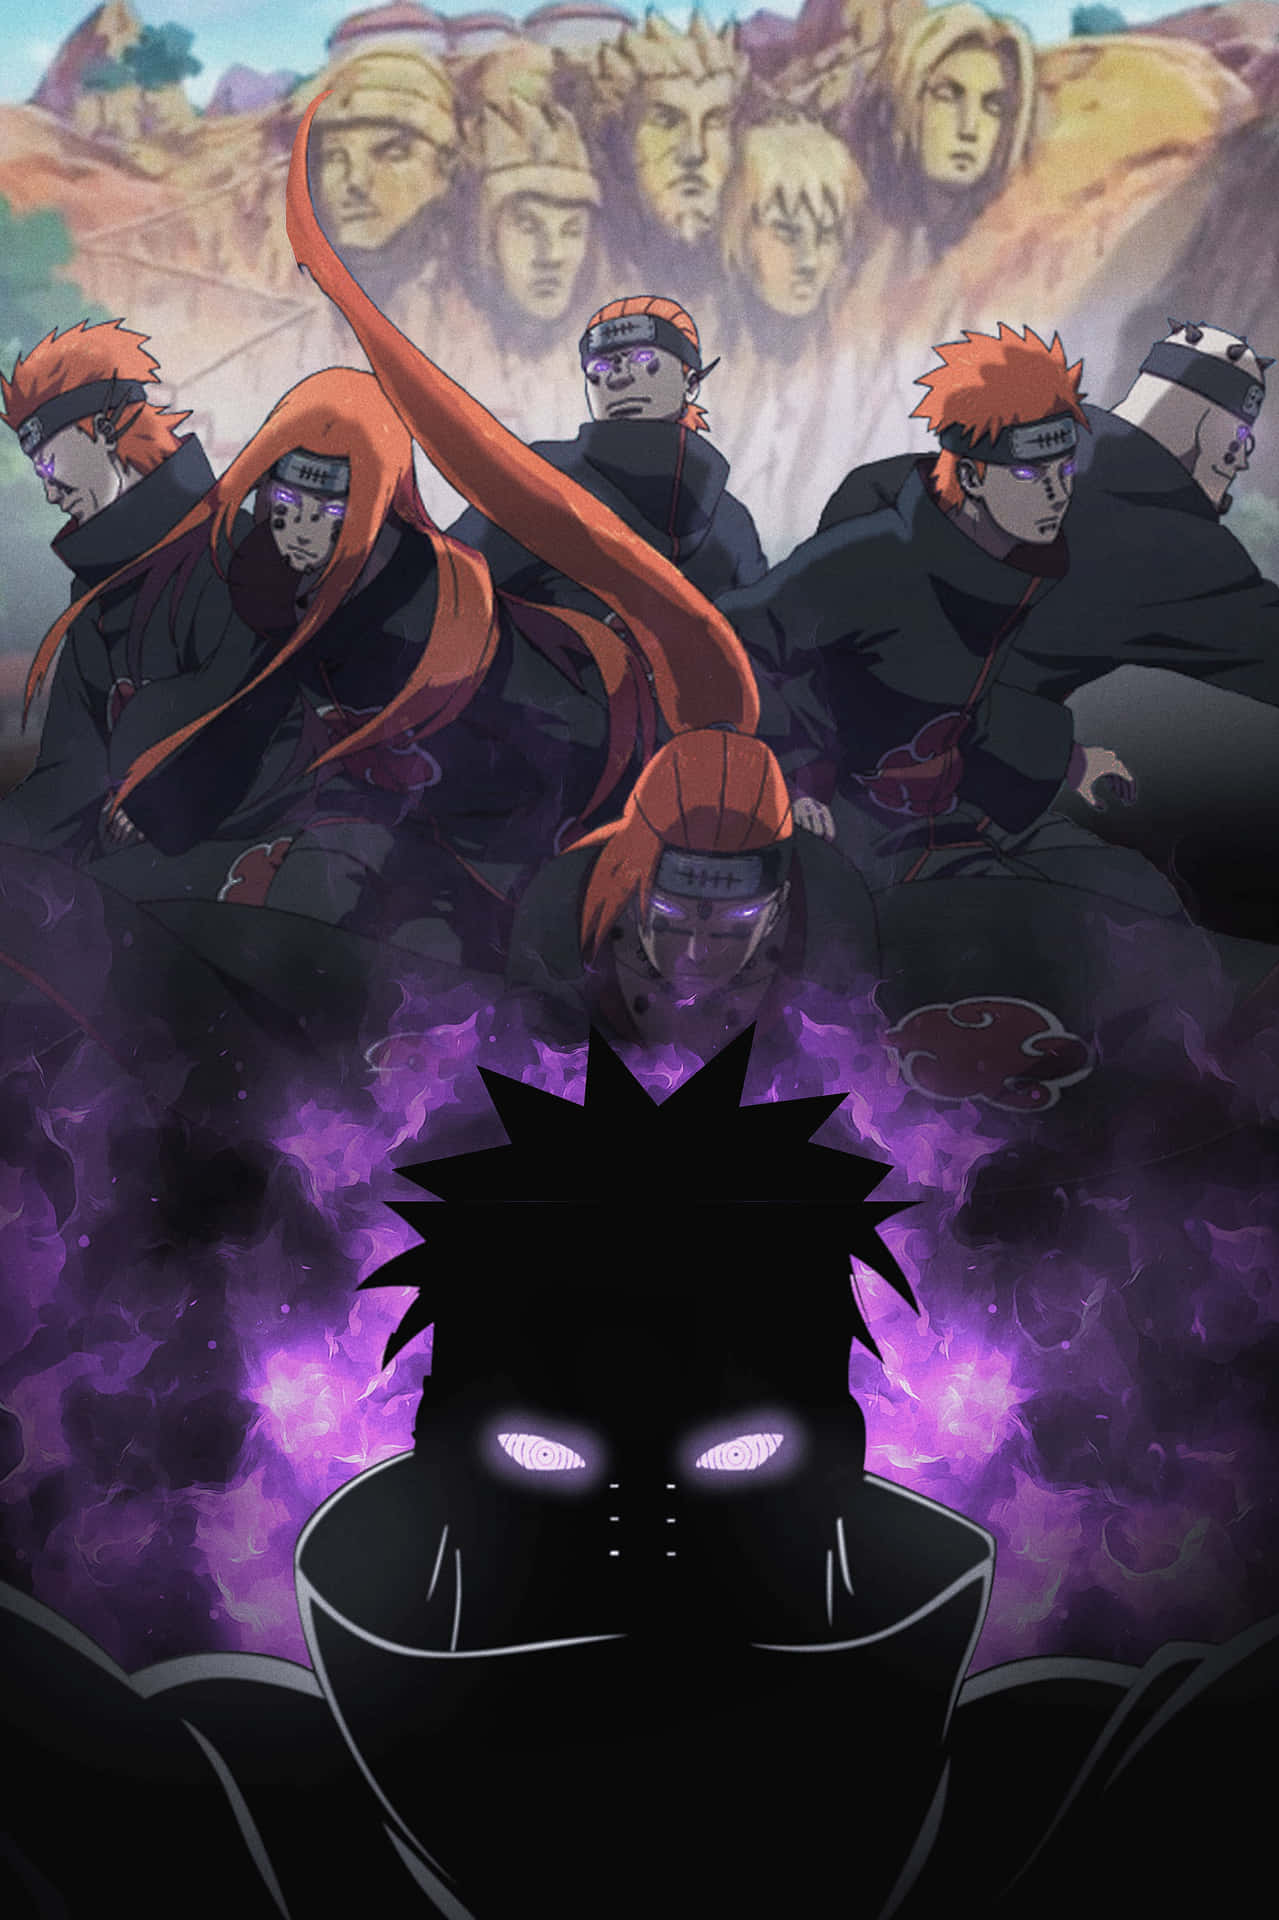 Feel the power of Akatsuki with this vivid poster" Wallpaper